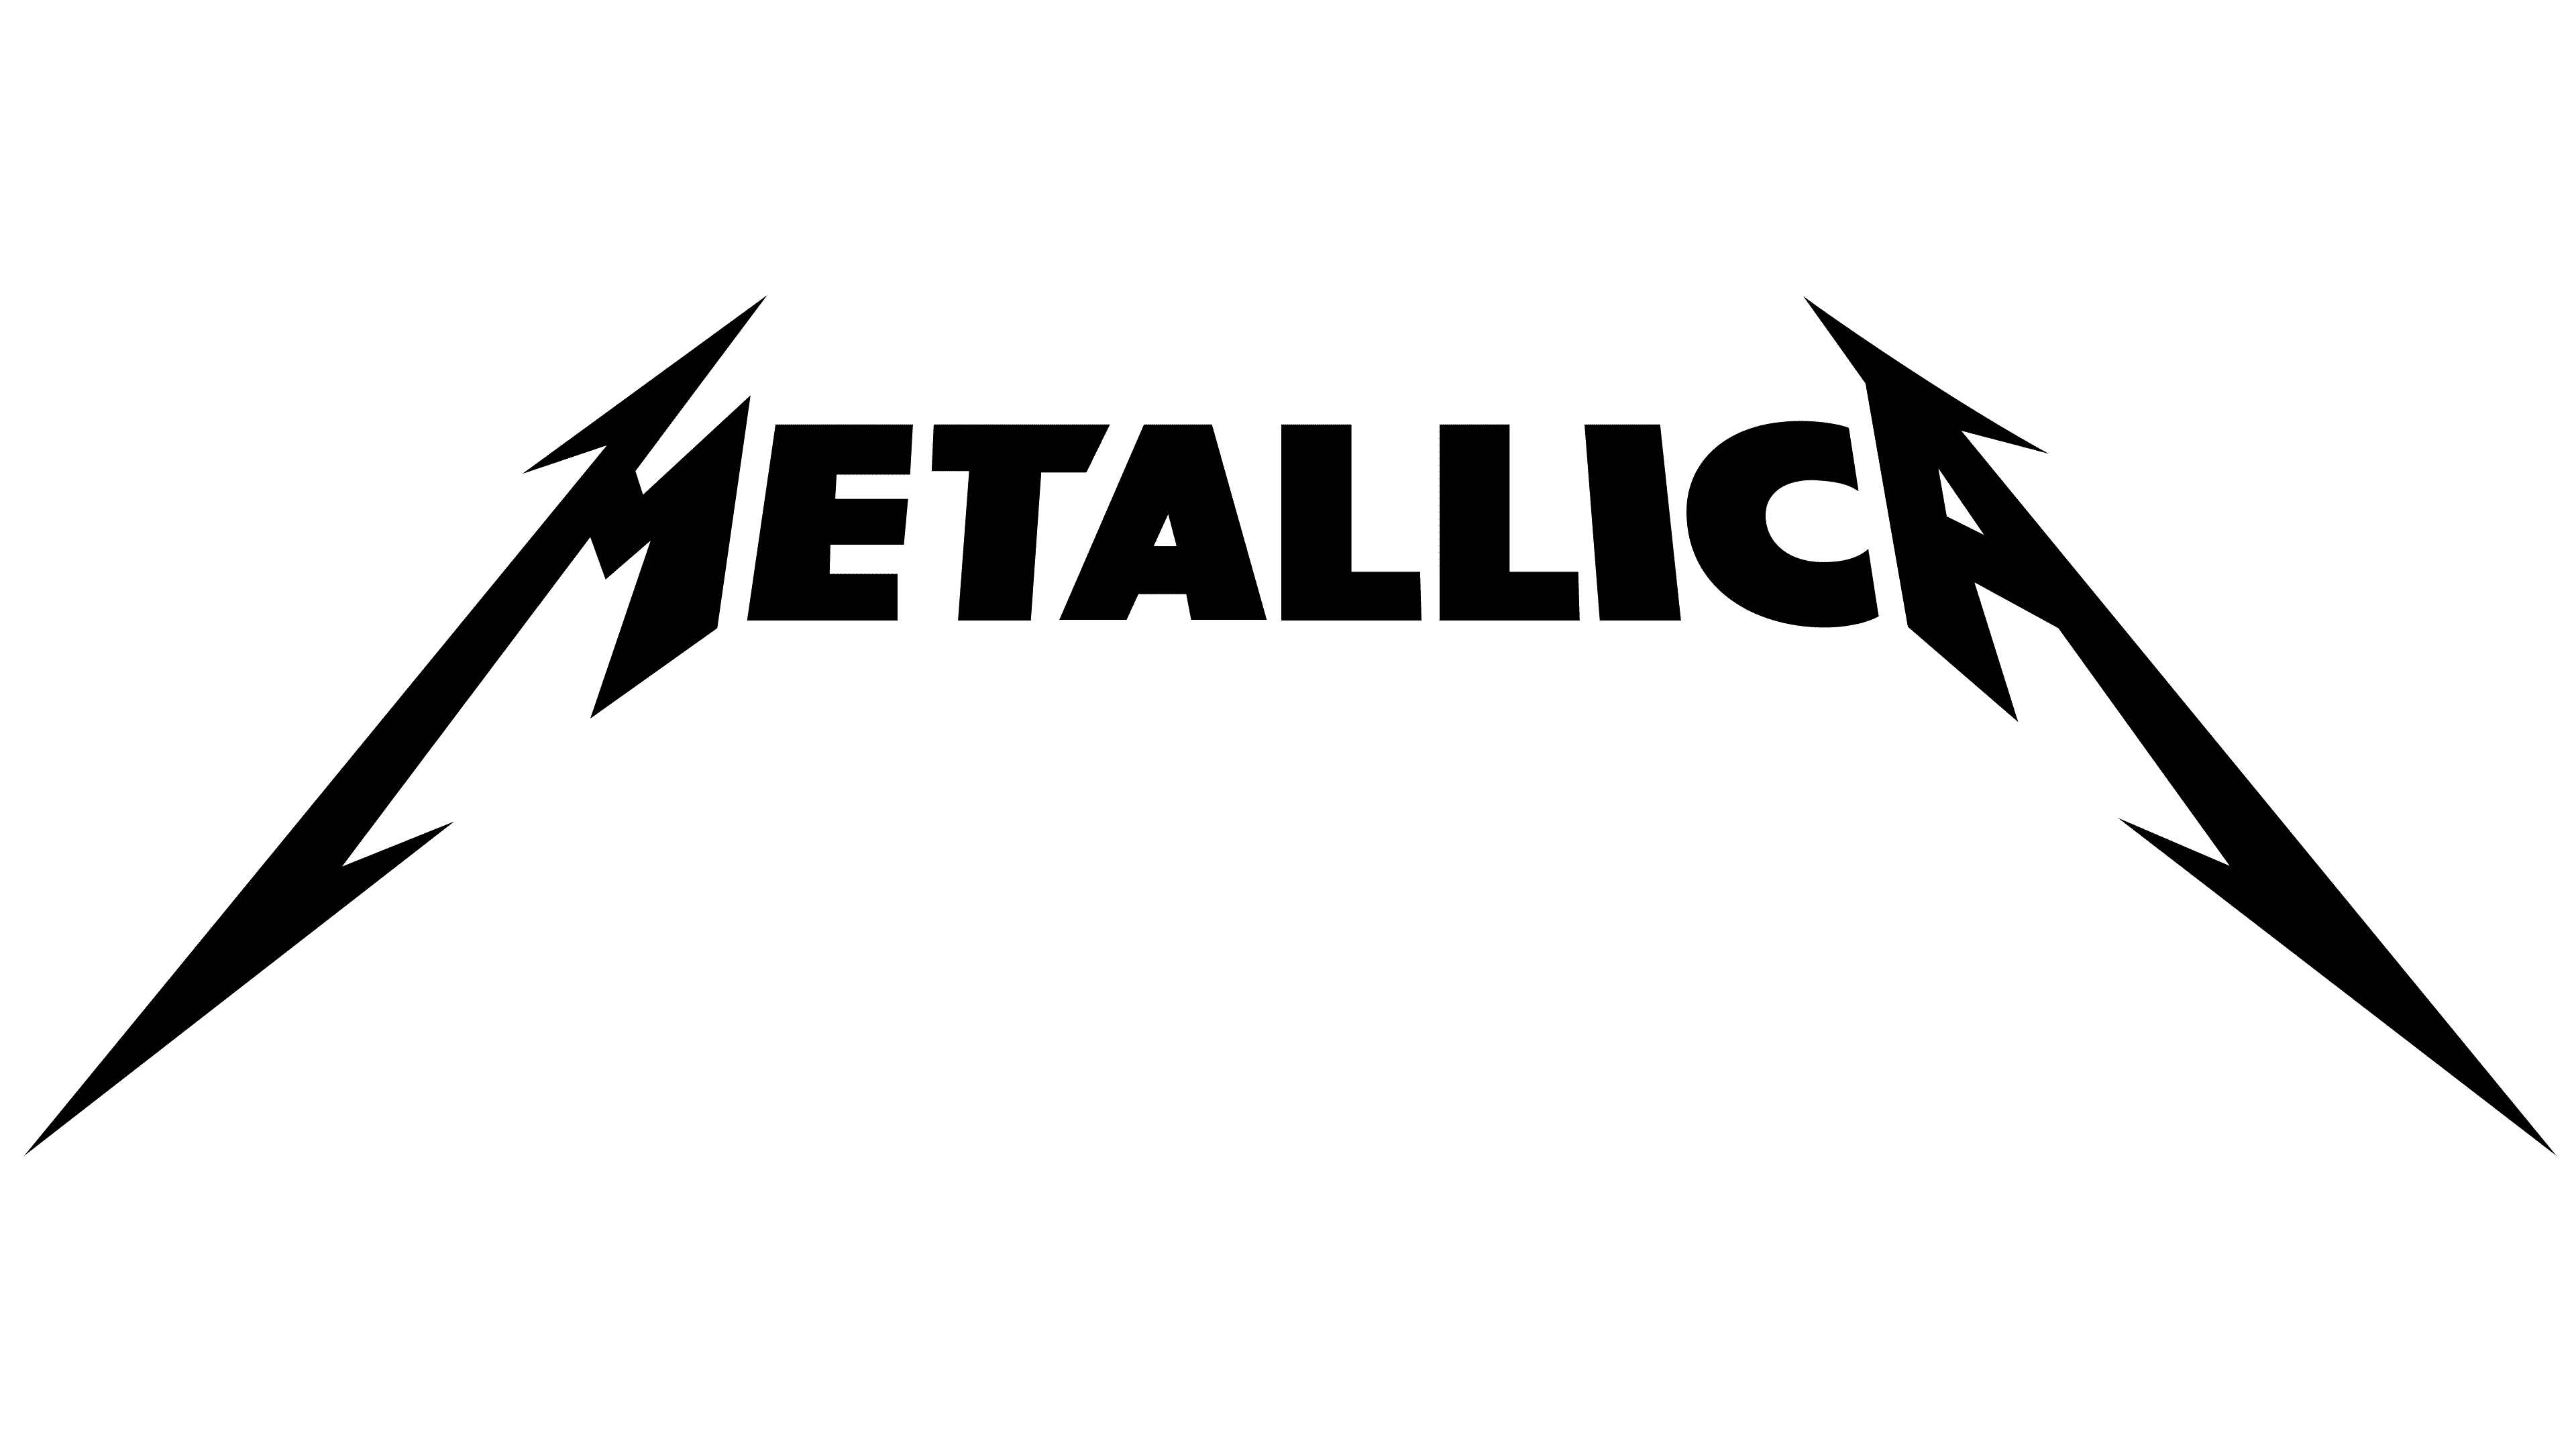 Metallica Logo The Most Famous Brands And Company Logos In The World